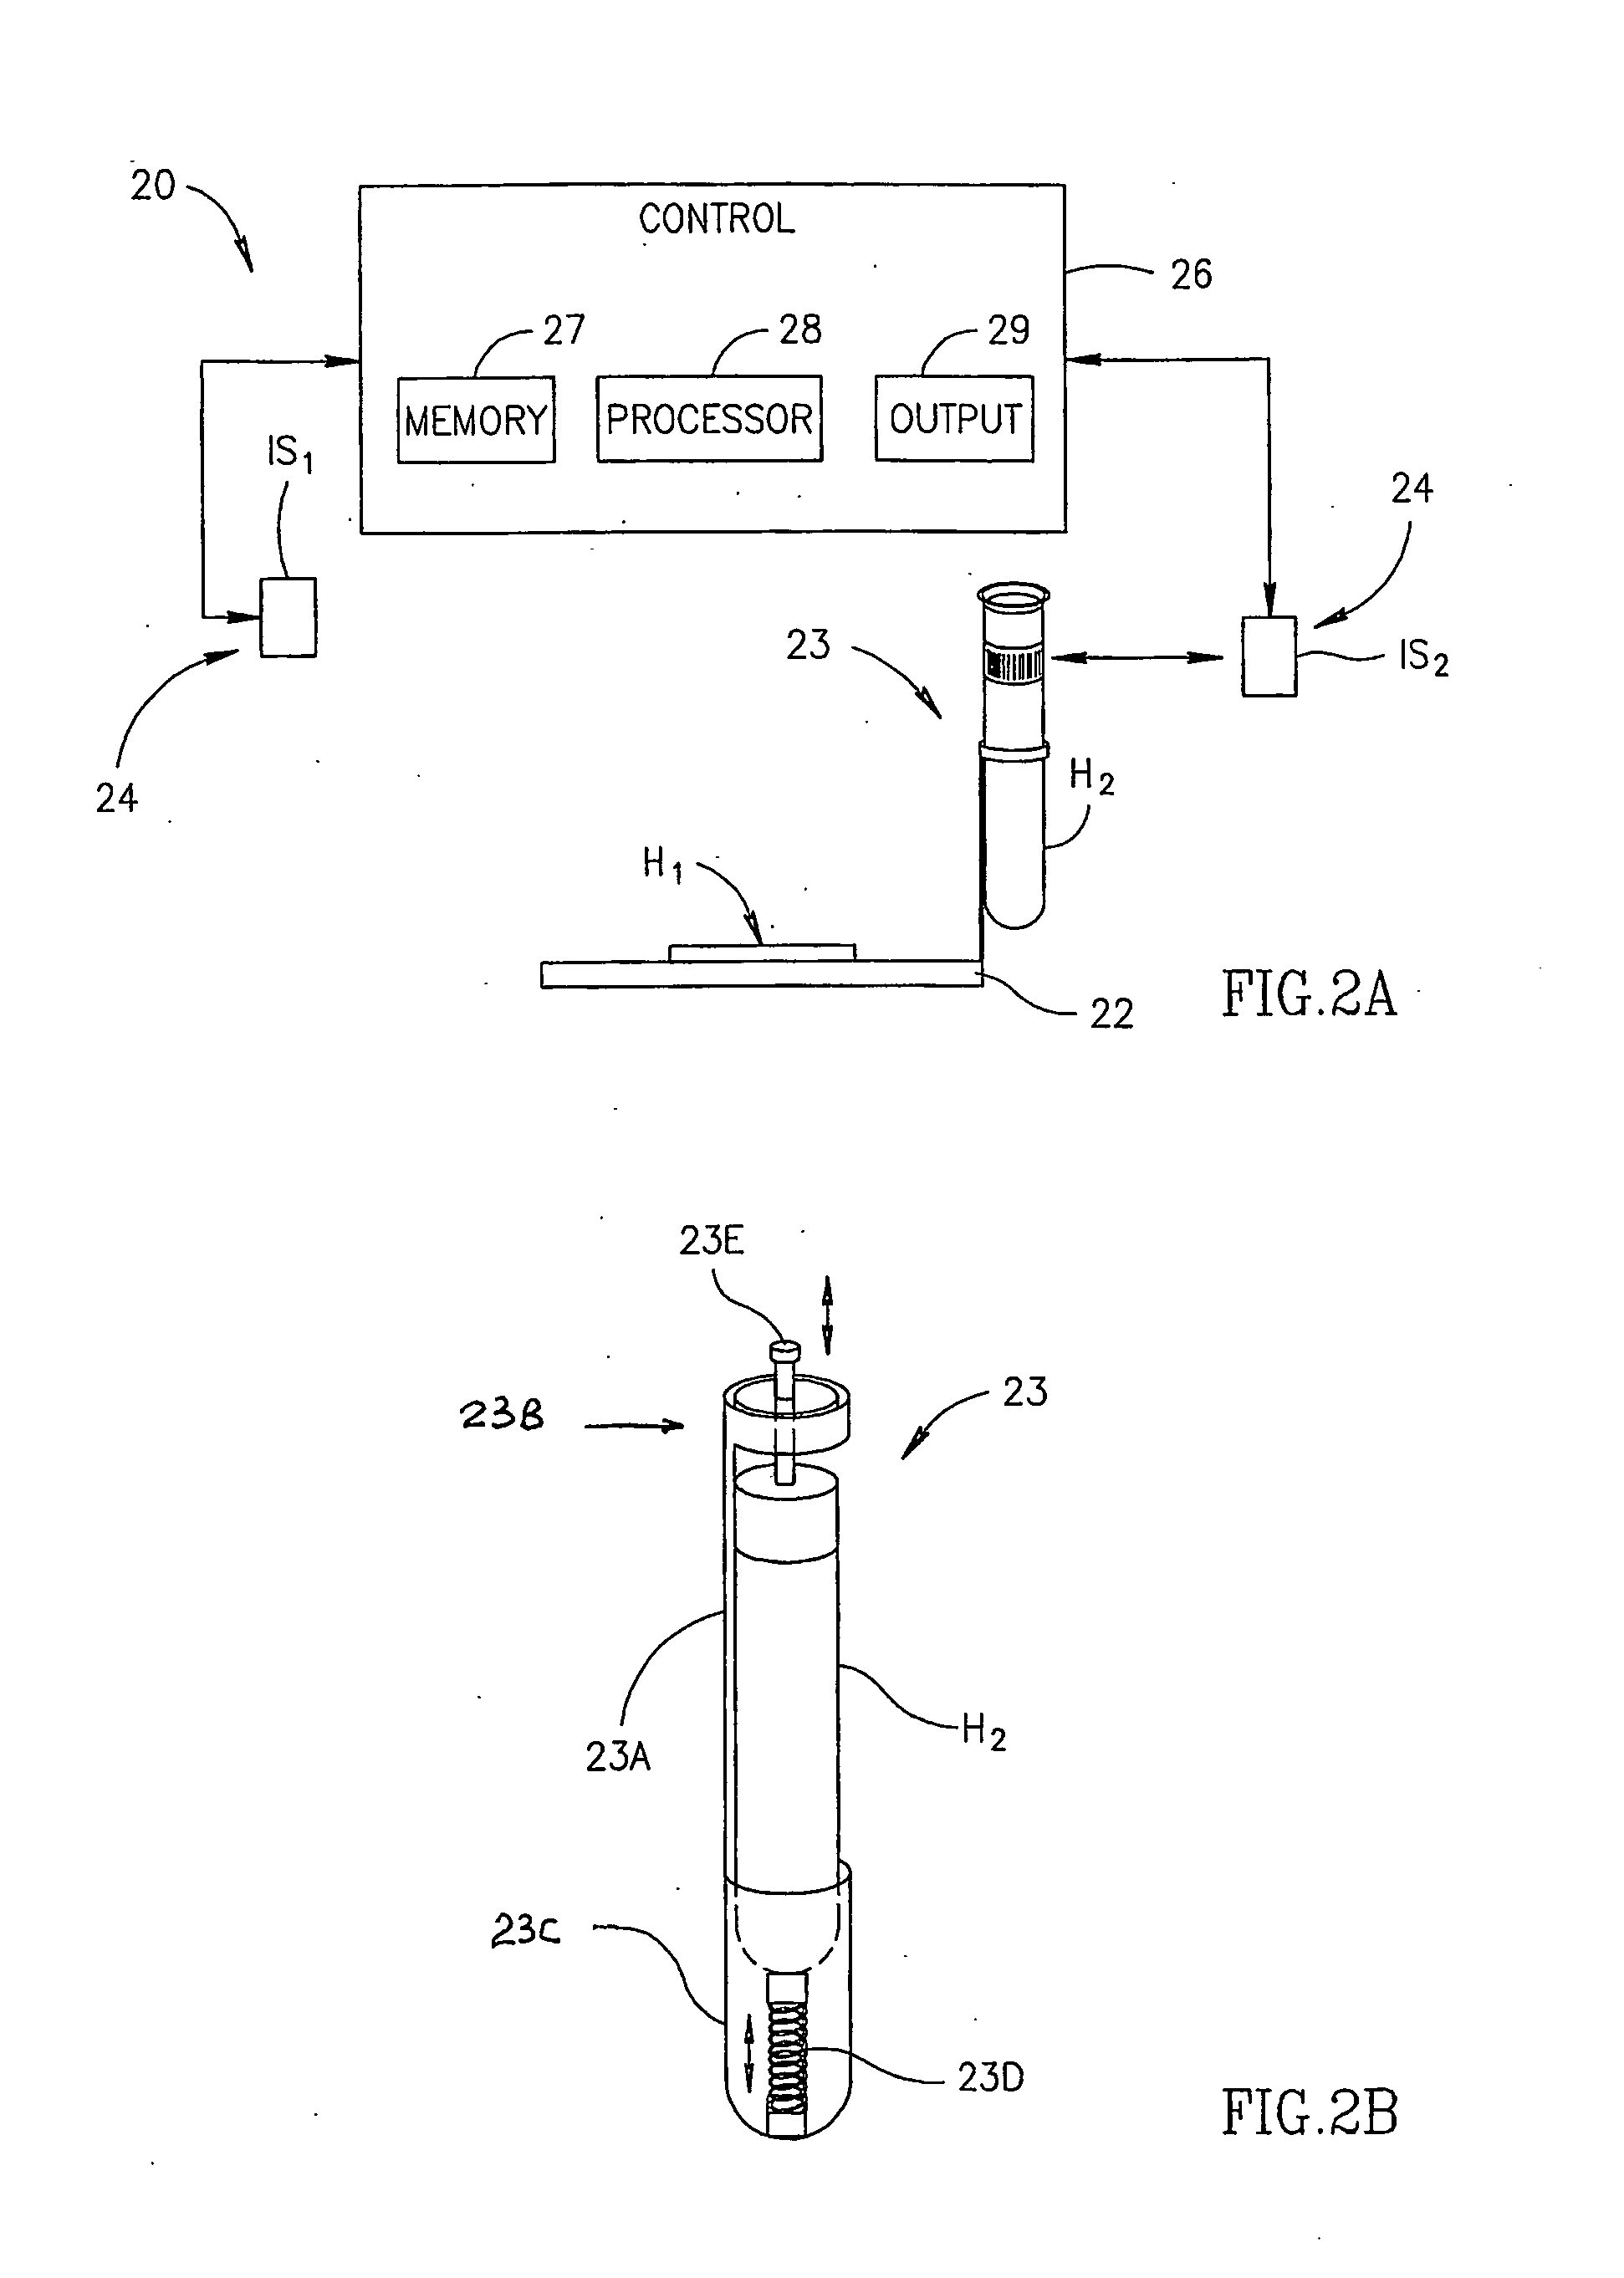 Method and system for controlling the development of biological entities